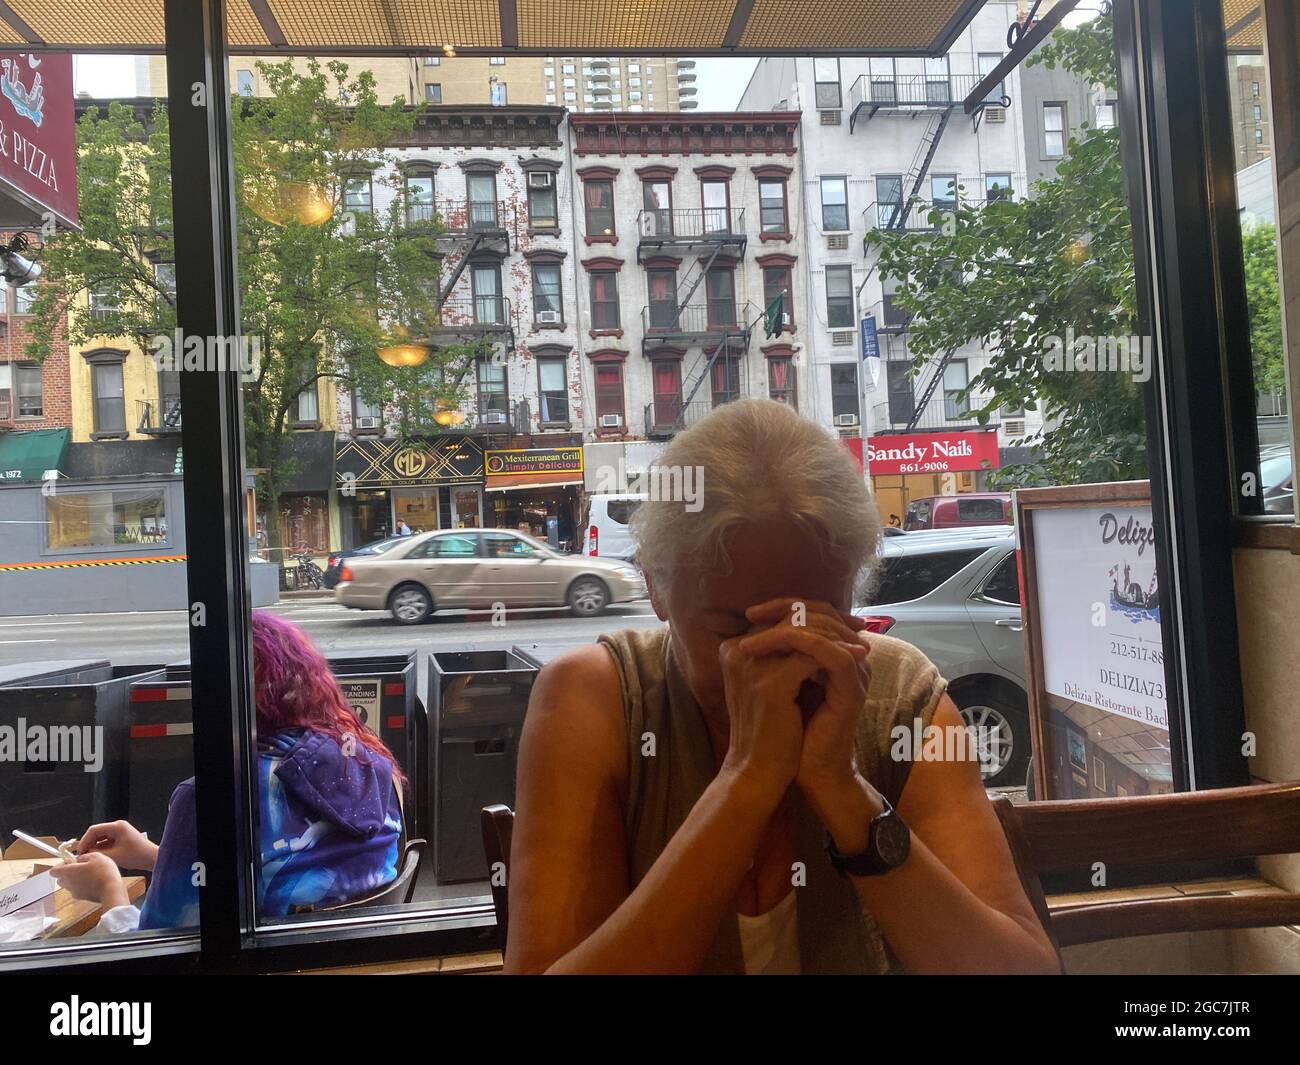 Woman in a moment of prayer before having lunch at an Upper East Side restaurant along 1st Avenue in Manhattan, New York City. Stock Photo